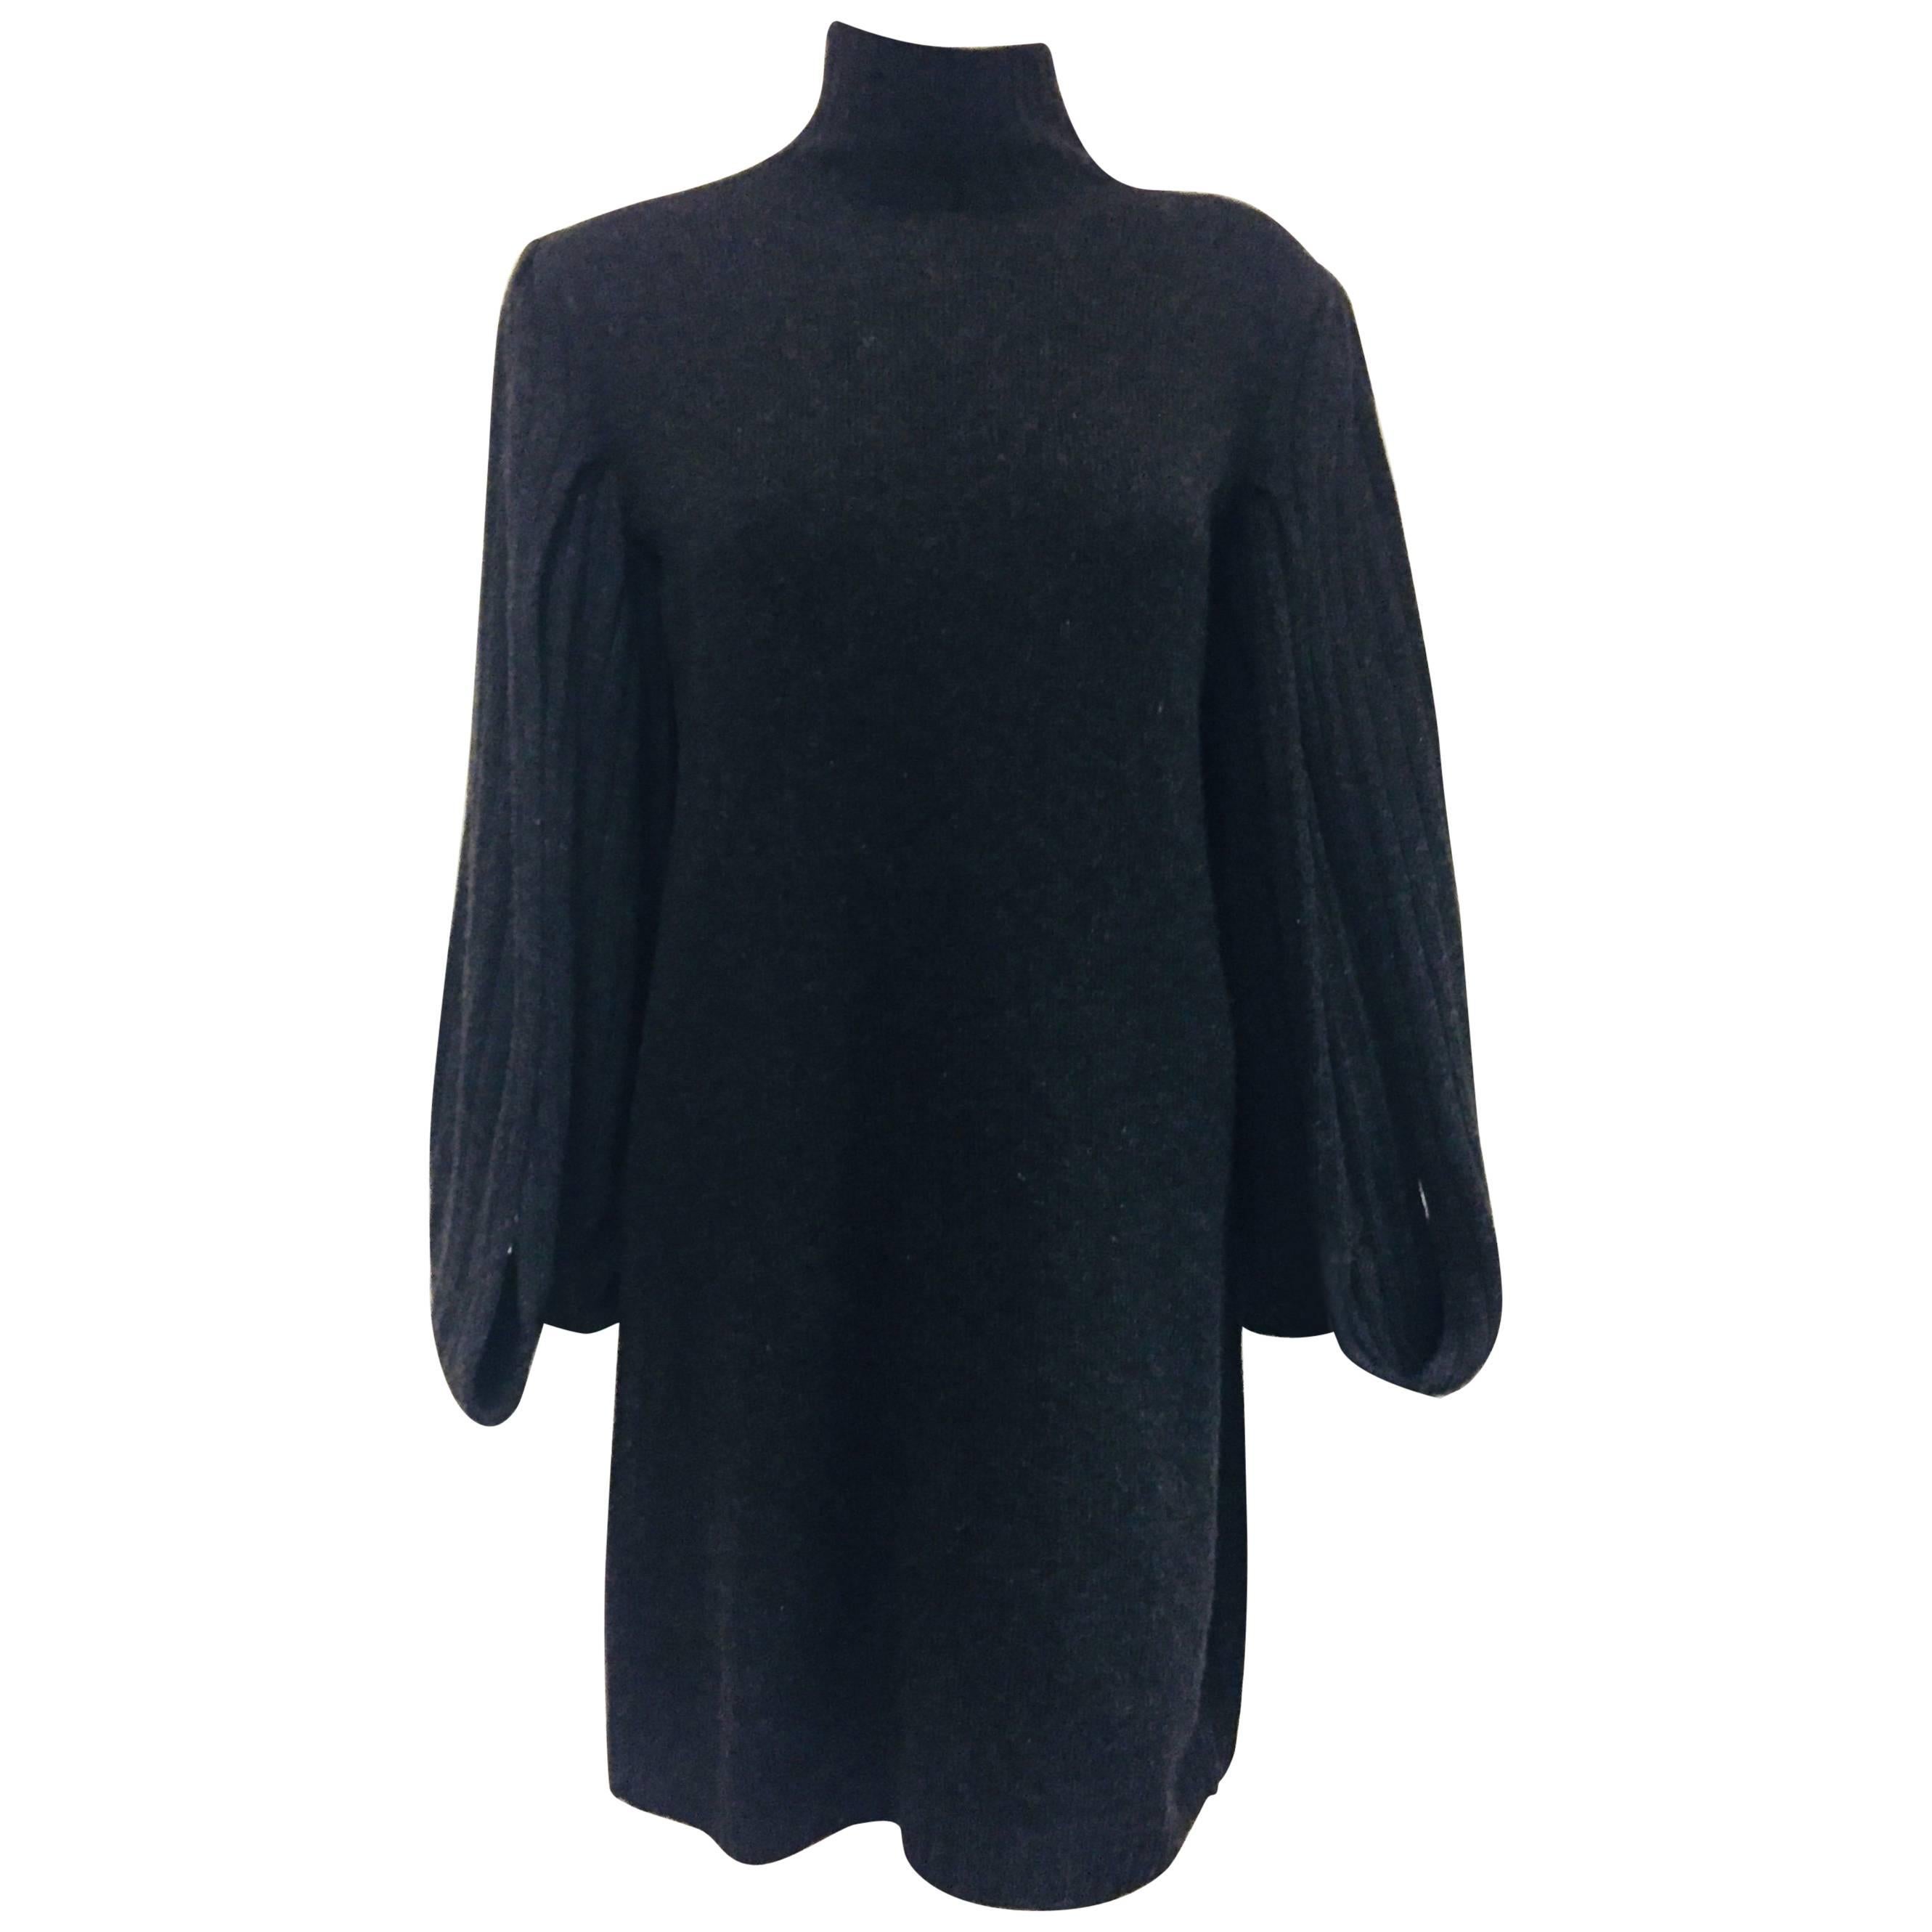 Chanel Charcoal Long Open Sleeve Knit Cashmere Sweater Dress